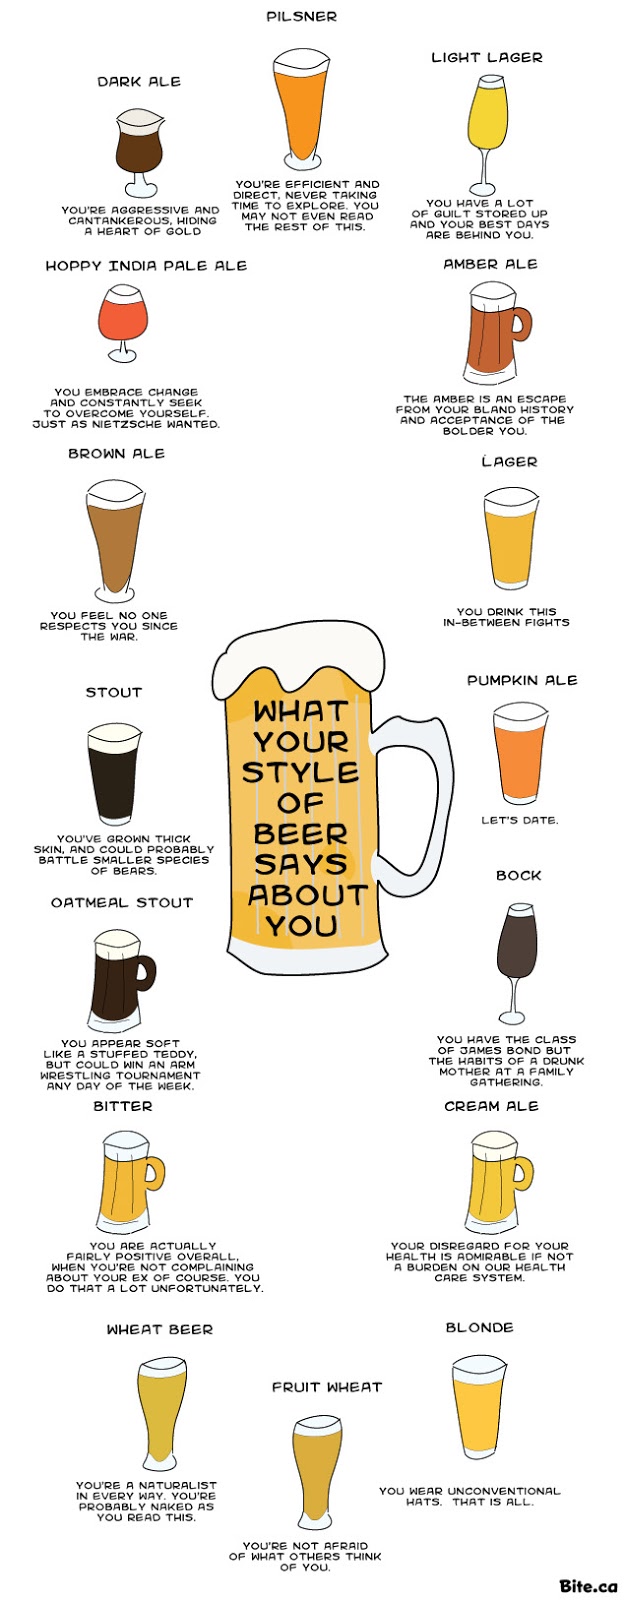 Beer - your style